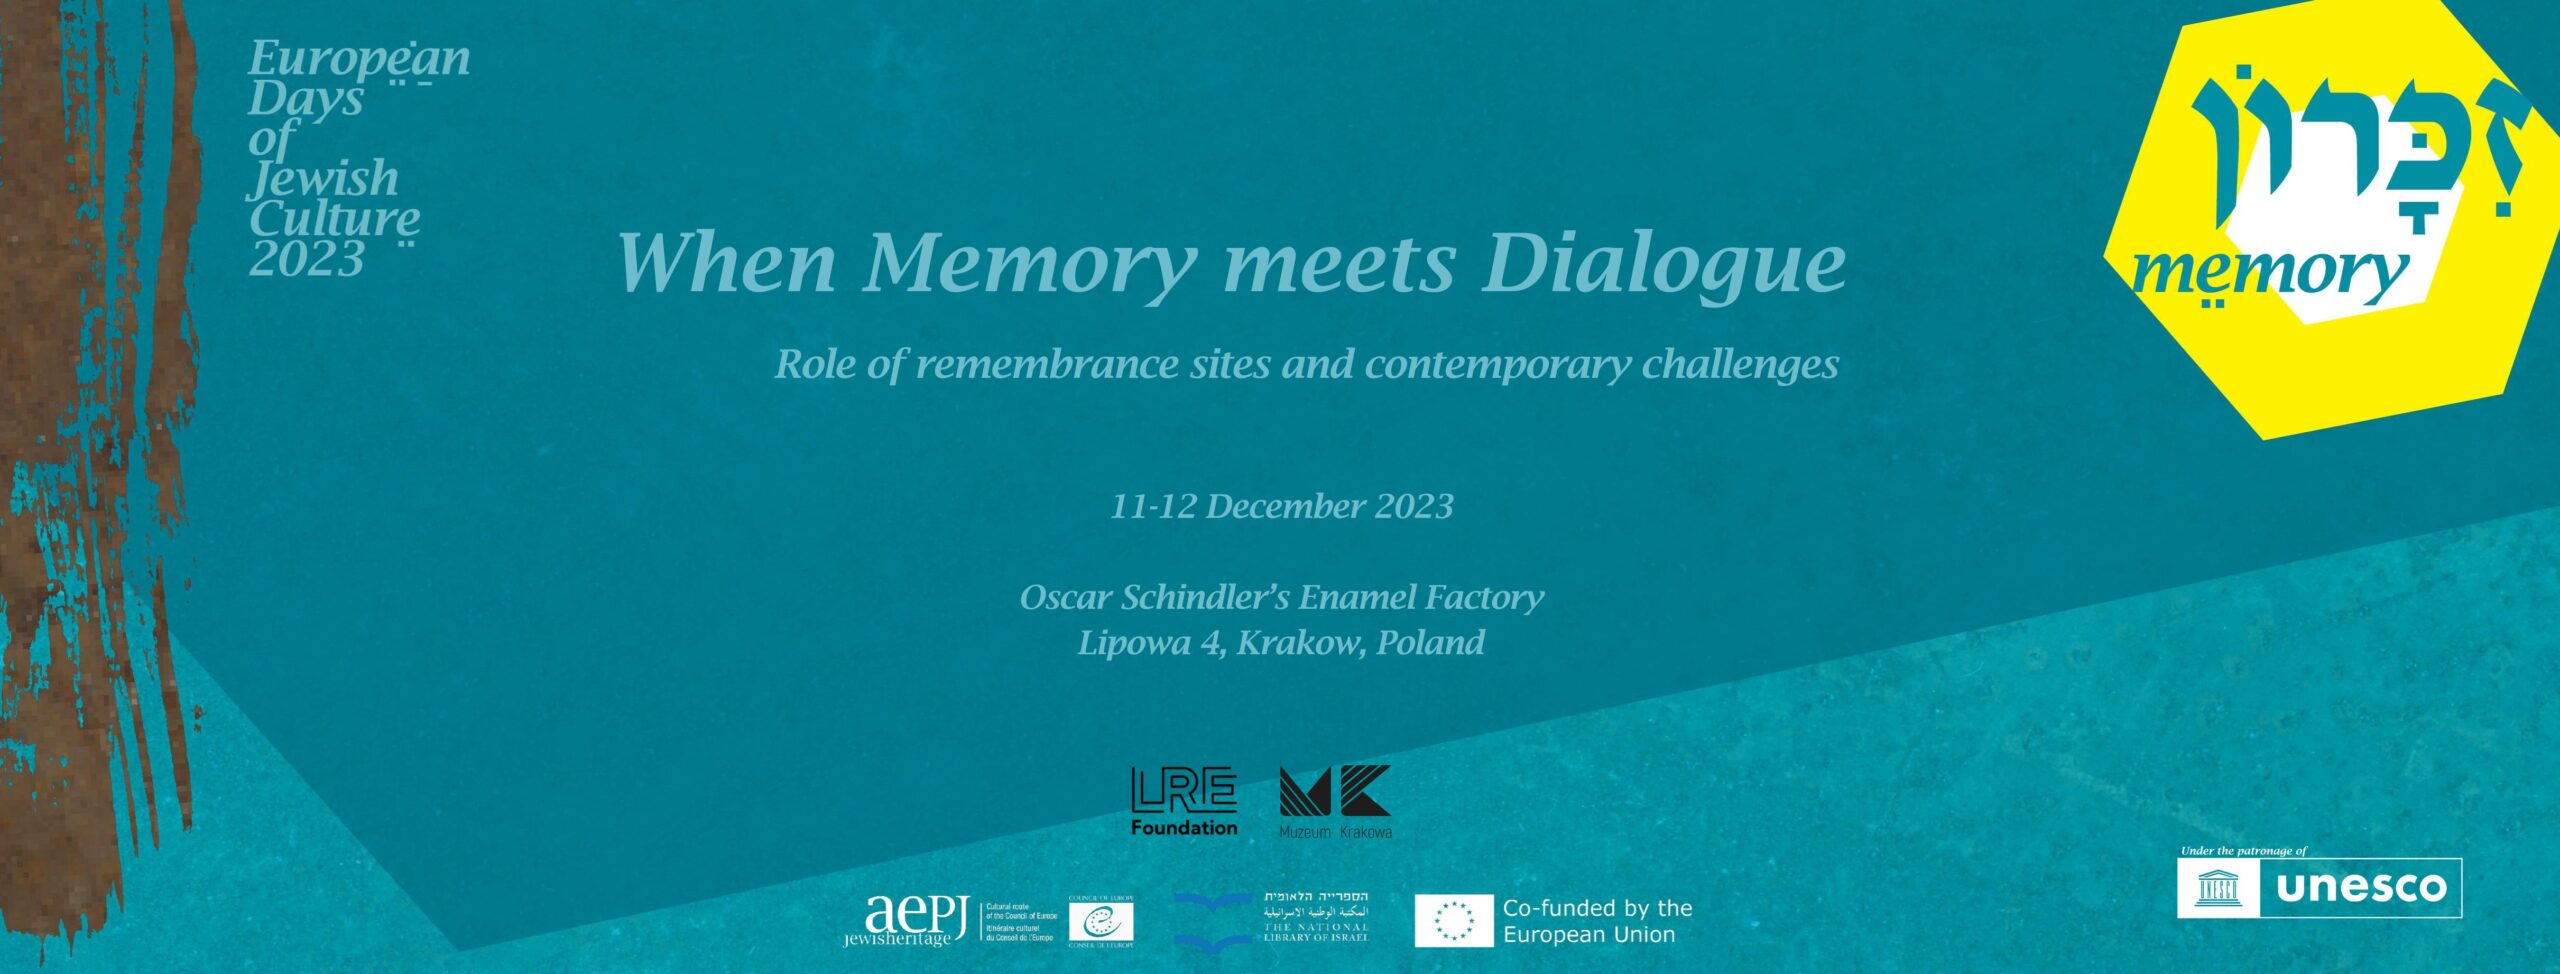 “When Memory Meets Dialogue”: The LRE Foundation’s memory project conference at the EDJC 2023 